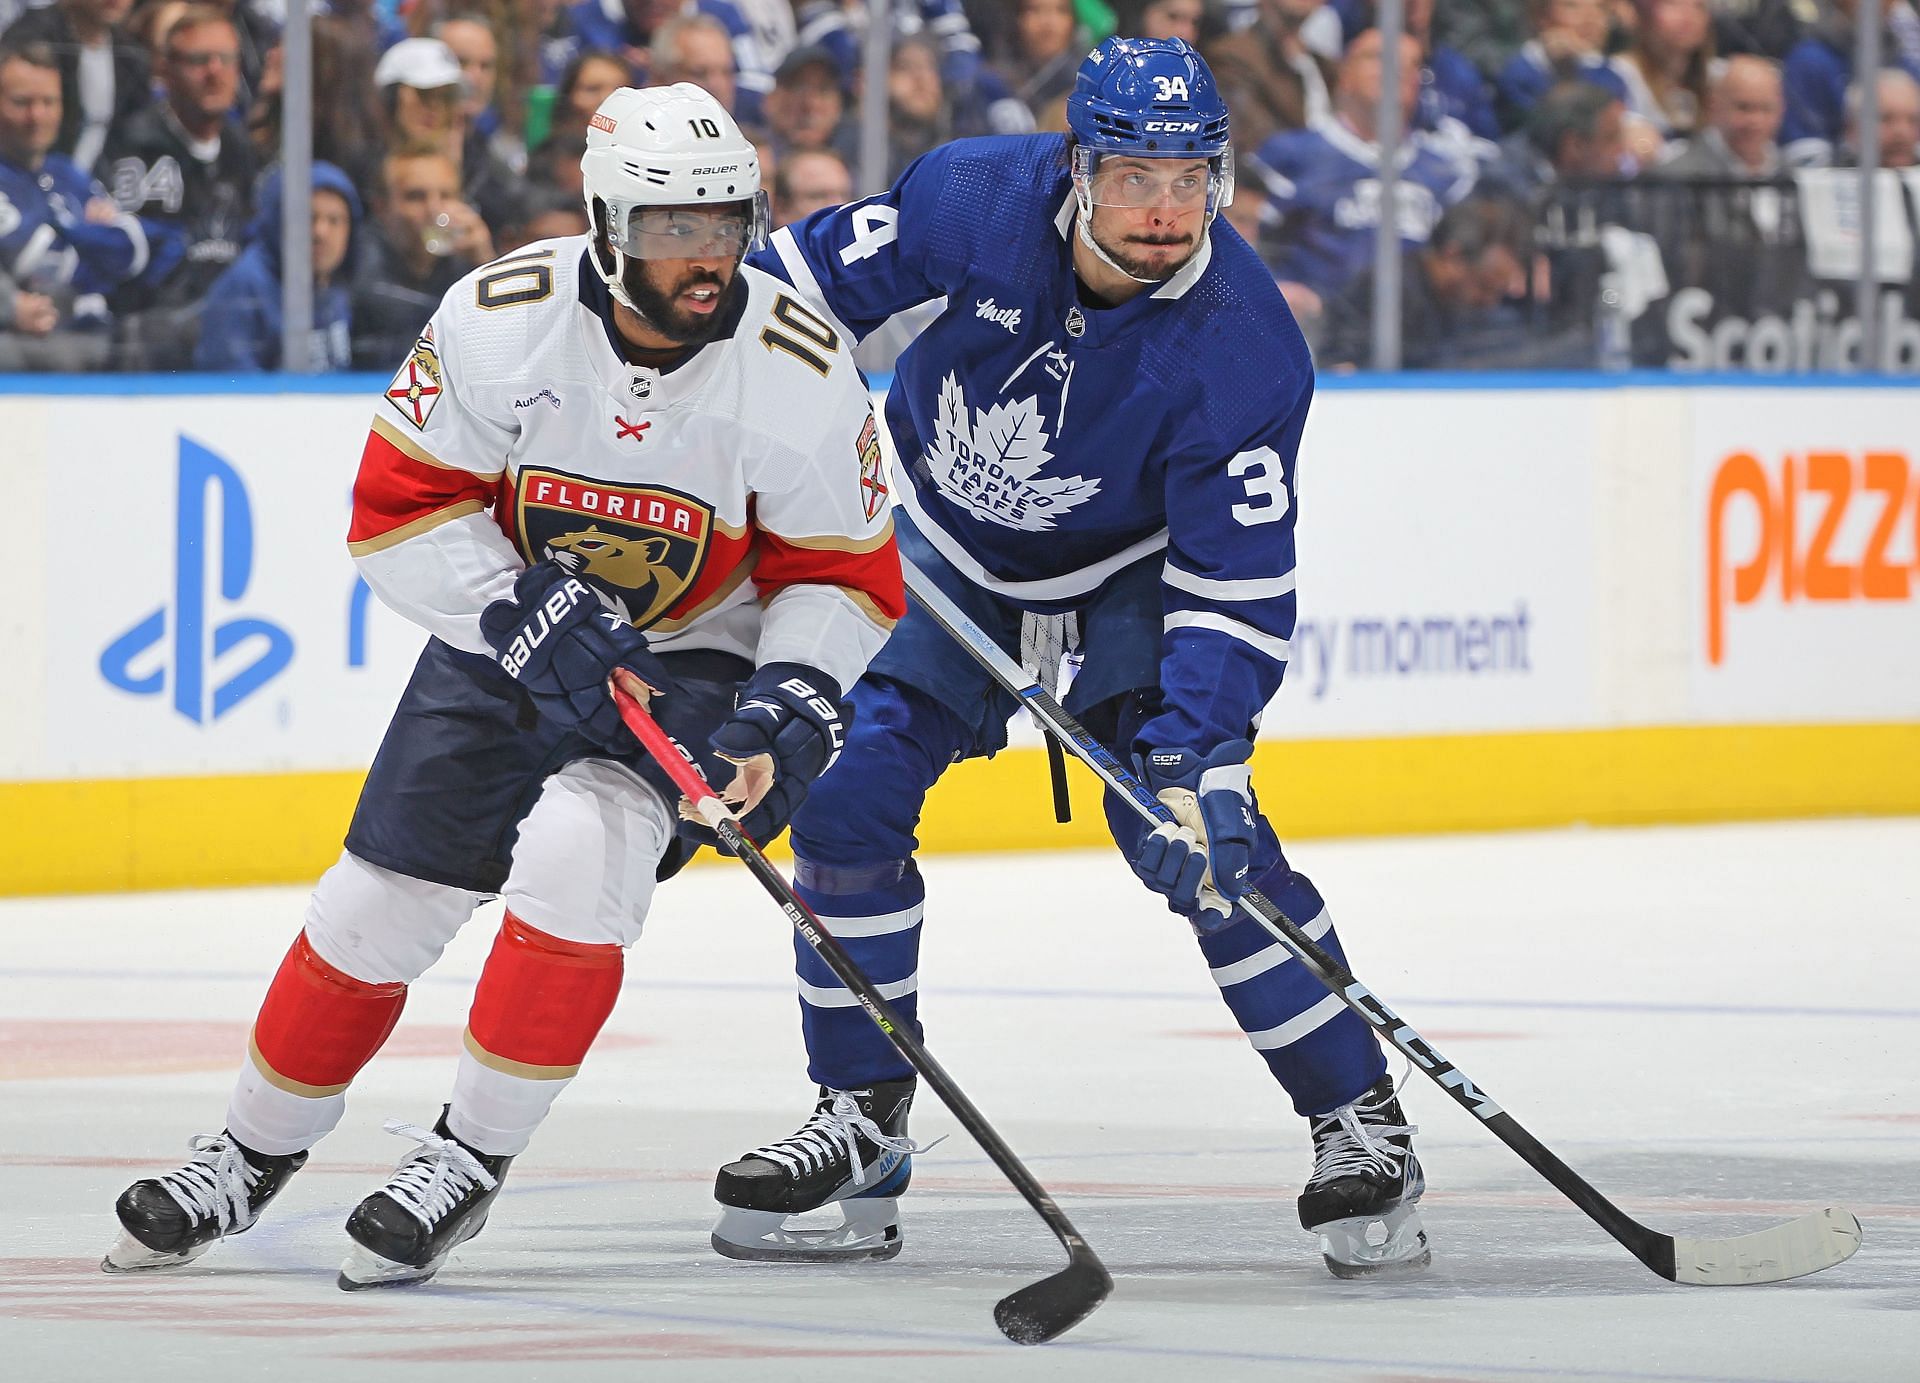 Toronto Maple Leafs vs Florida Panthers Game 3 How to Watch, TV